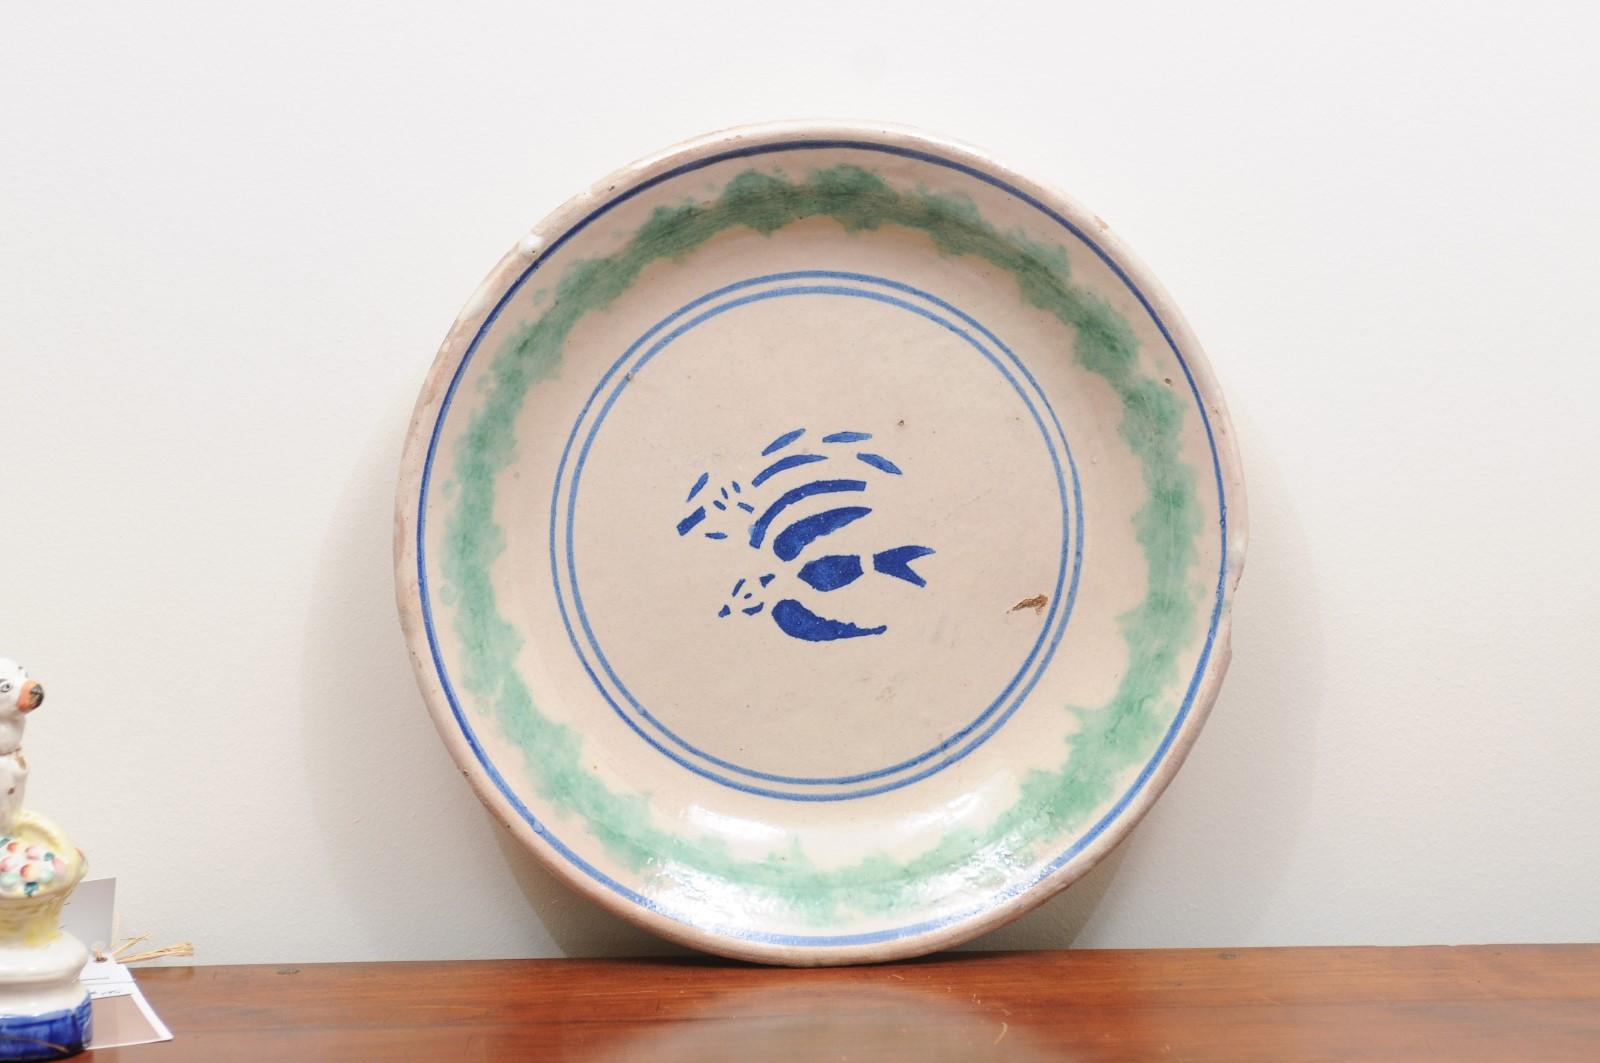 Pottery Italian 19th Century Plate with Stylized Blue Bird Motifs and Green Accents